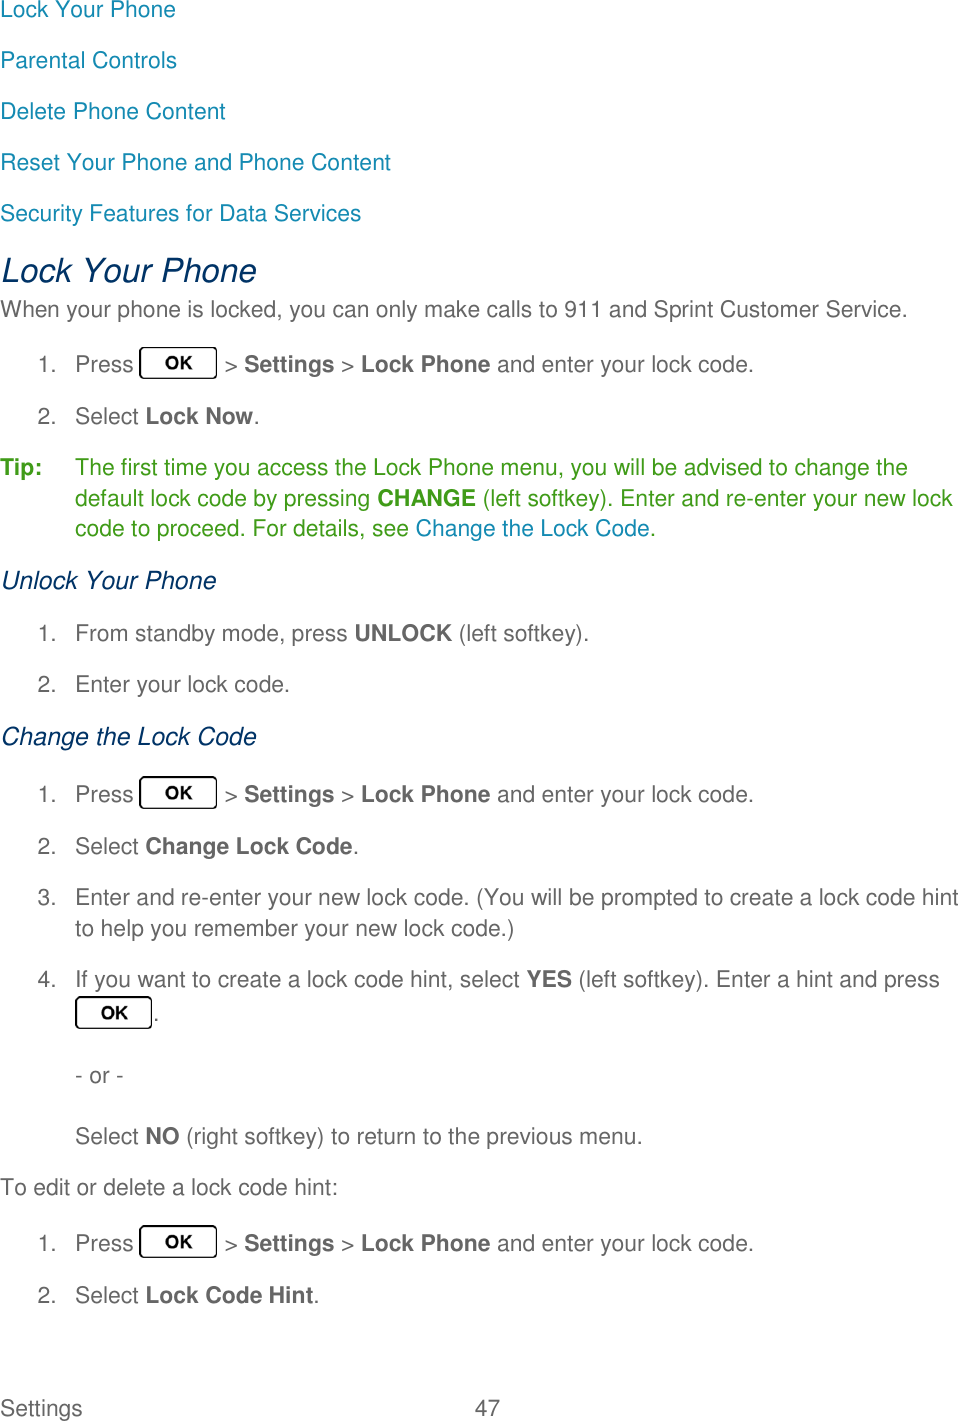 Settings  47   Lock Your Phone Parental Controls Delete Phone Content Reset Your Phone and Phone Content Security Features for Data Services Lock Your Phone When your phone is locked, you can only make calls to 911 and Sprint Customer Service. 1.  Press   &gt; Settings &gt; Lock Phone and enter your lock code. 2.  Select Lock Now. Tip:  The first time you access the Lock Phone menu, you will be advised to change the default lock code by pressing CHANGE (left softkey). Enter and re-enter your new lock code to proceed. For details, see Change the Lock Code. Unlock Your Phone 1.  From standby mode, press UNLOCK (left softkey). 2.  Enter your lock code. Change the Lock Code 1.  Press   &gt; Settings &gt; Lock Phone and enter your lock code. 2.  Select Change Lock Code. 3.  Enter and re-enter your new lock code. (You will be prompted to create a lock code hint to help you remember your new lock code.) 4.  If you want to create a lock code hint, select YES (left softkey). Enter a hint and press .  - or -  Select NO (right softkey) to return to the previous menu. To edit or delete a lock code hint:  1.  Press   &gt; Settings &gt; Lock Phone and enter your lock code. 2.  Select Lock Code Hint. 